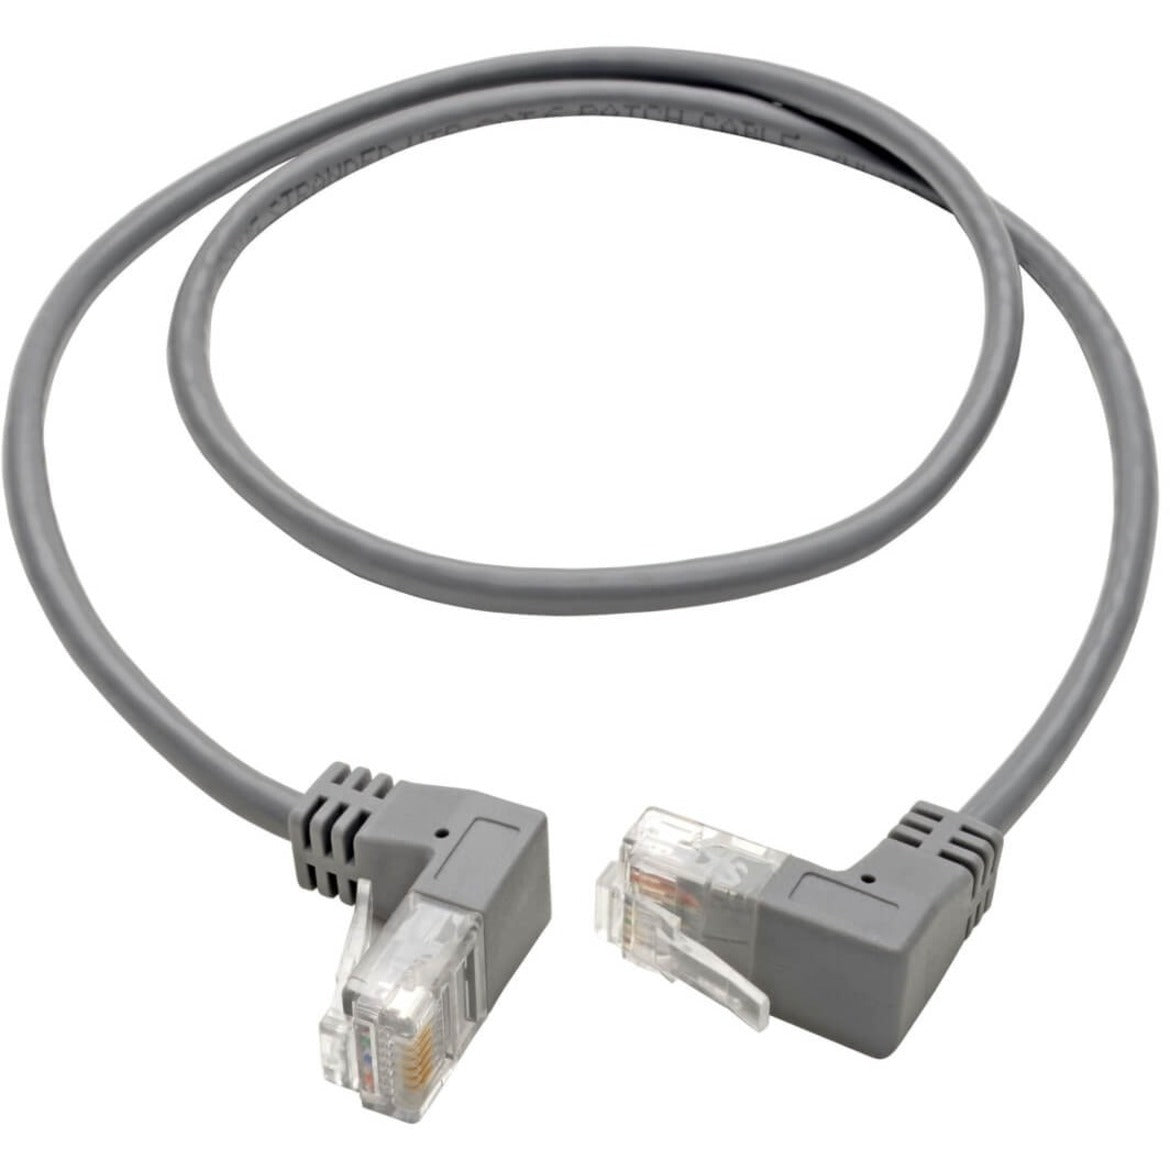 Tripp Lite N201-SR1-GY Right-Angle Cat6 UTP Patch Cable - 1 ft., M/M, Slim, Gray, Snagless